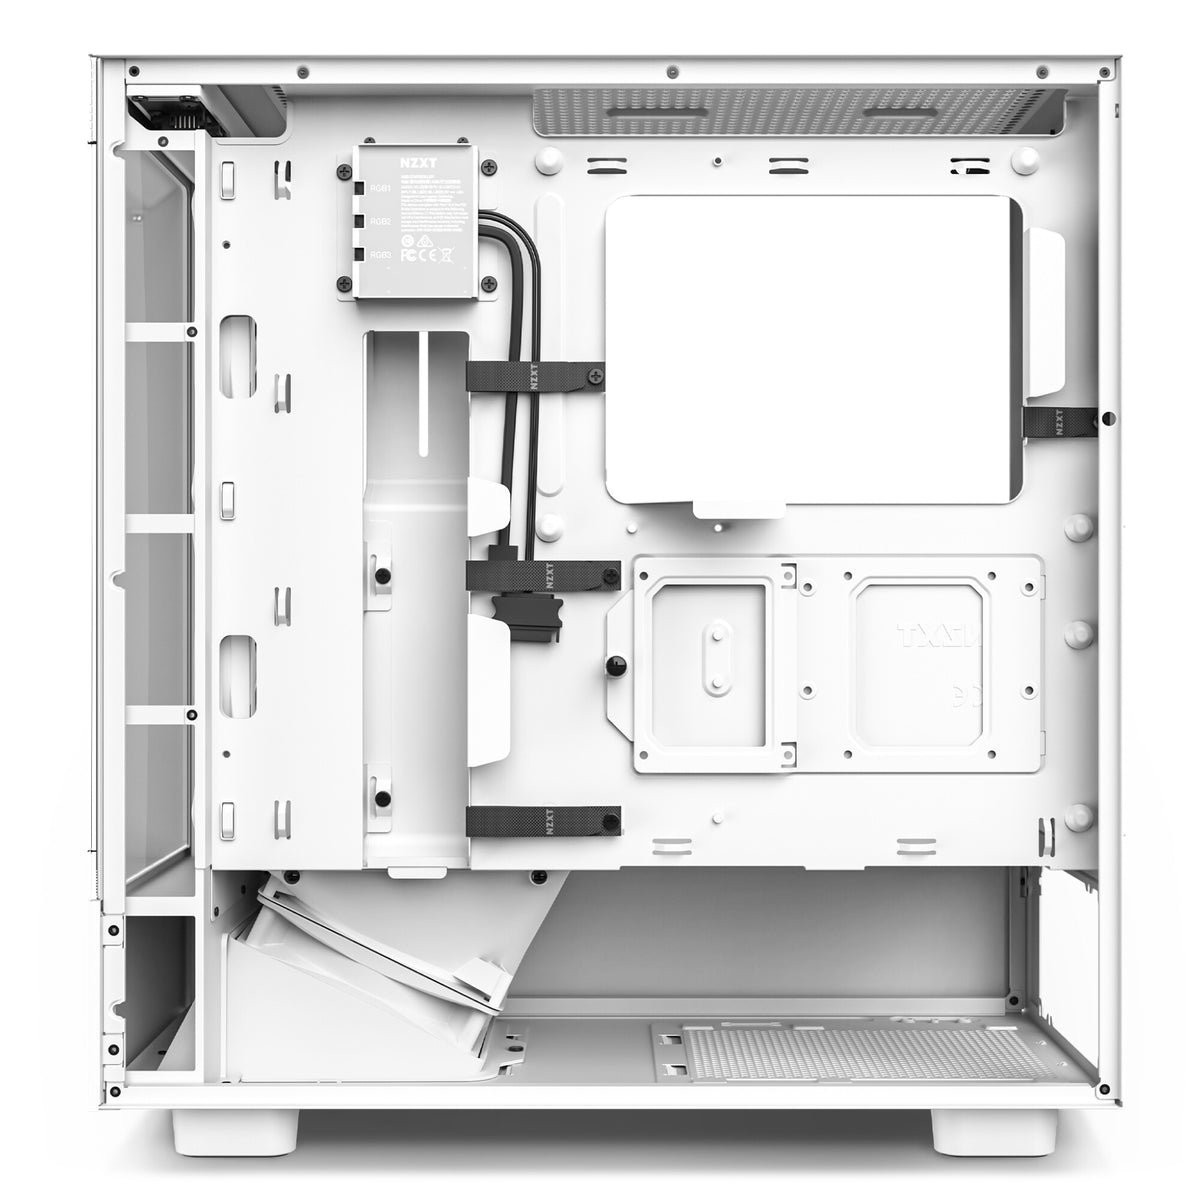 NZXT H5 Elite - ATX Mid Tower Case in White